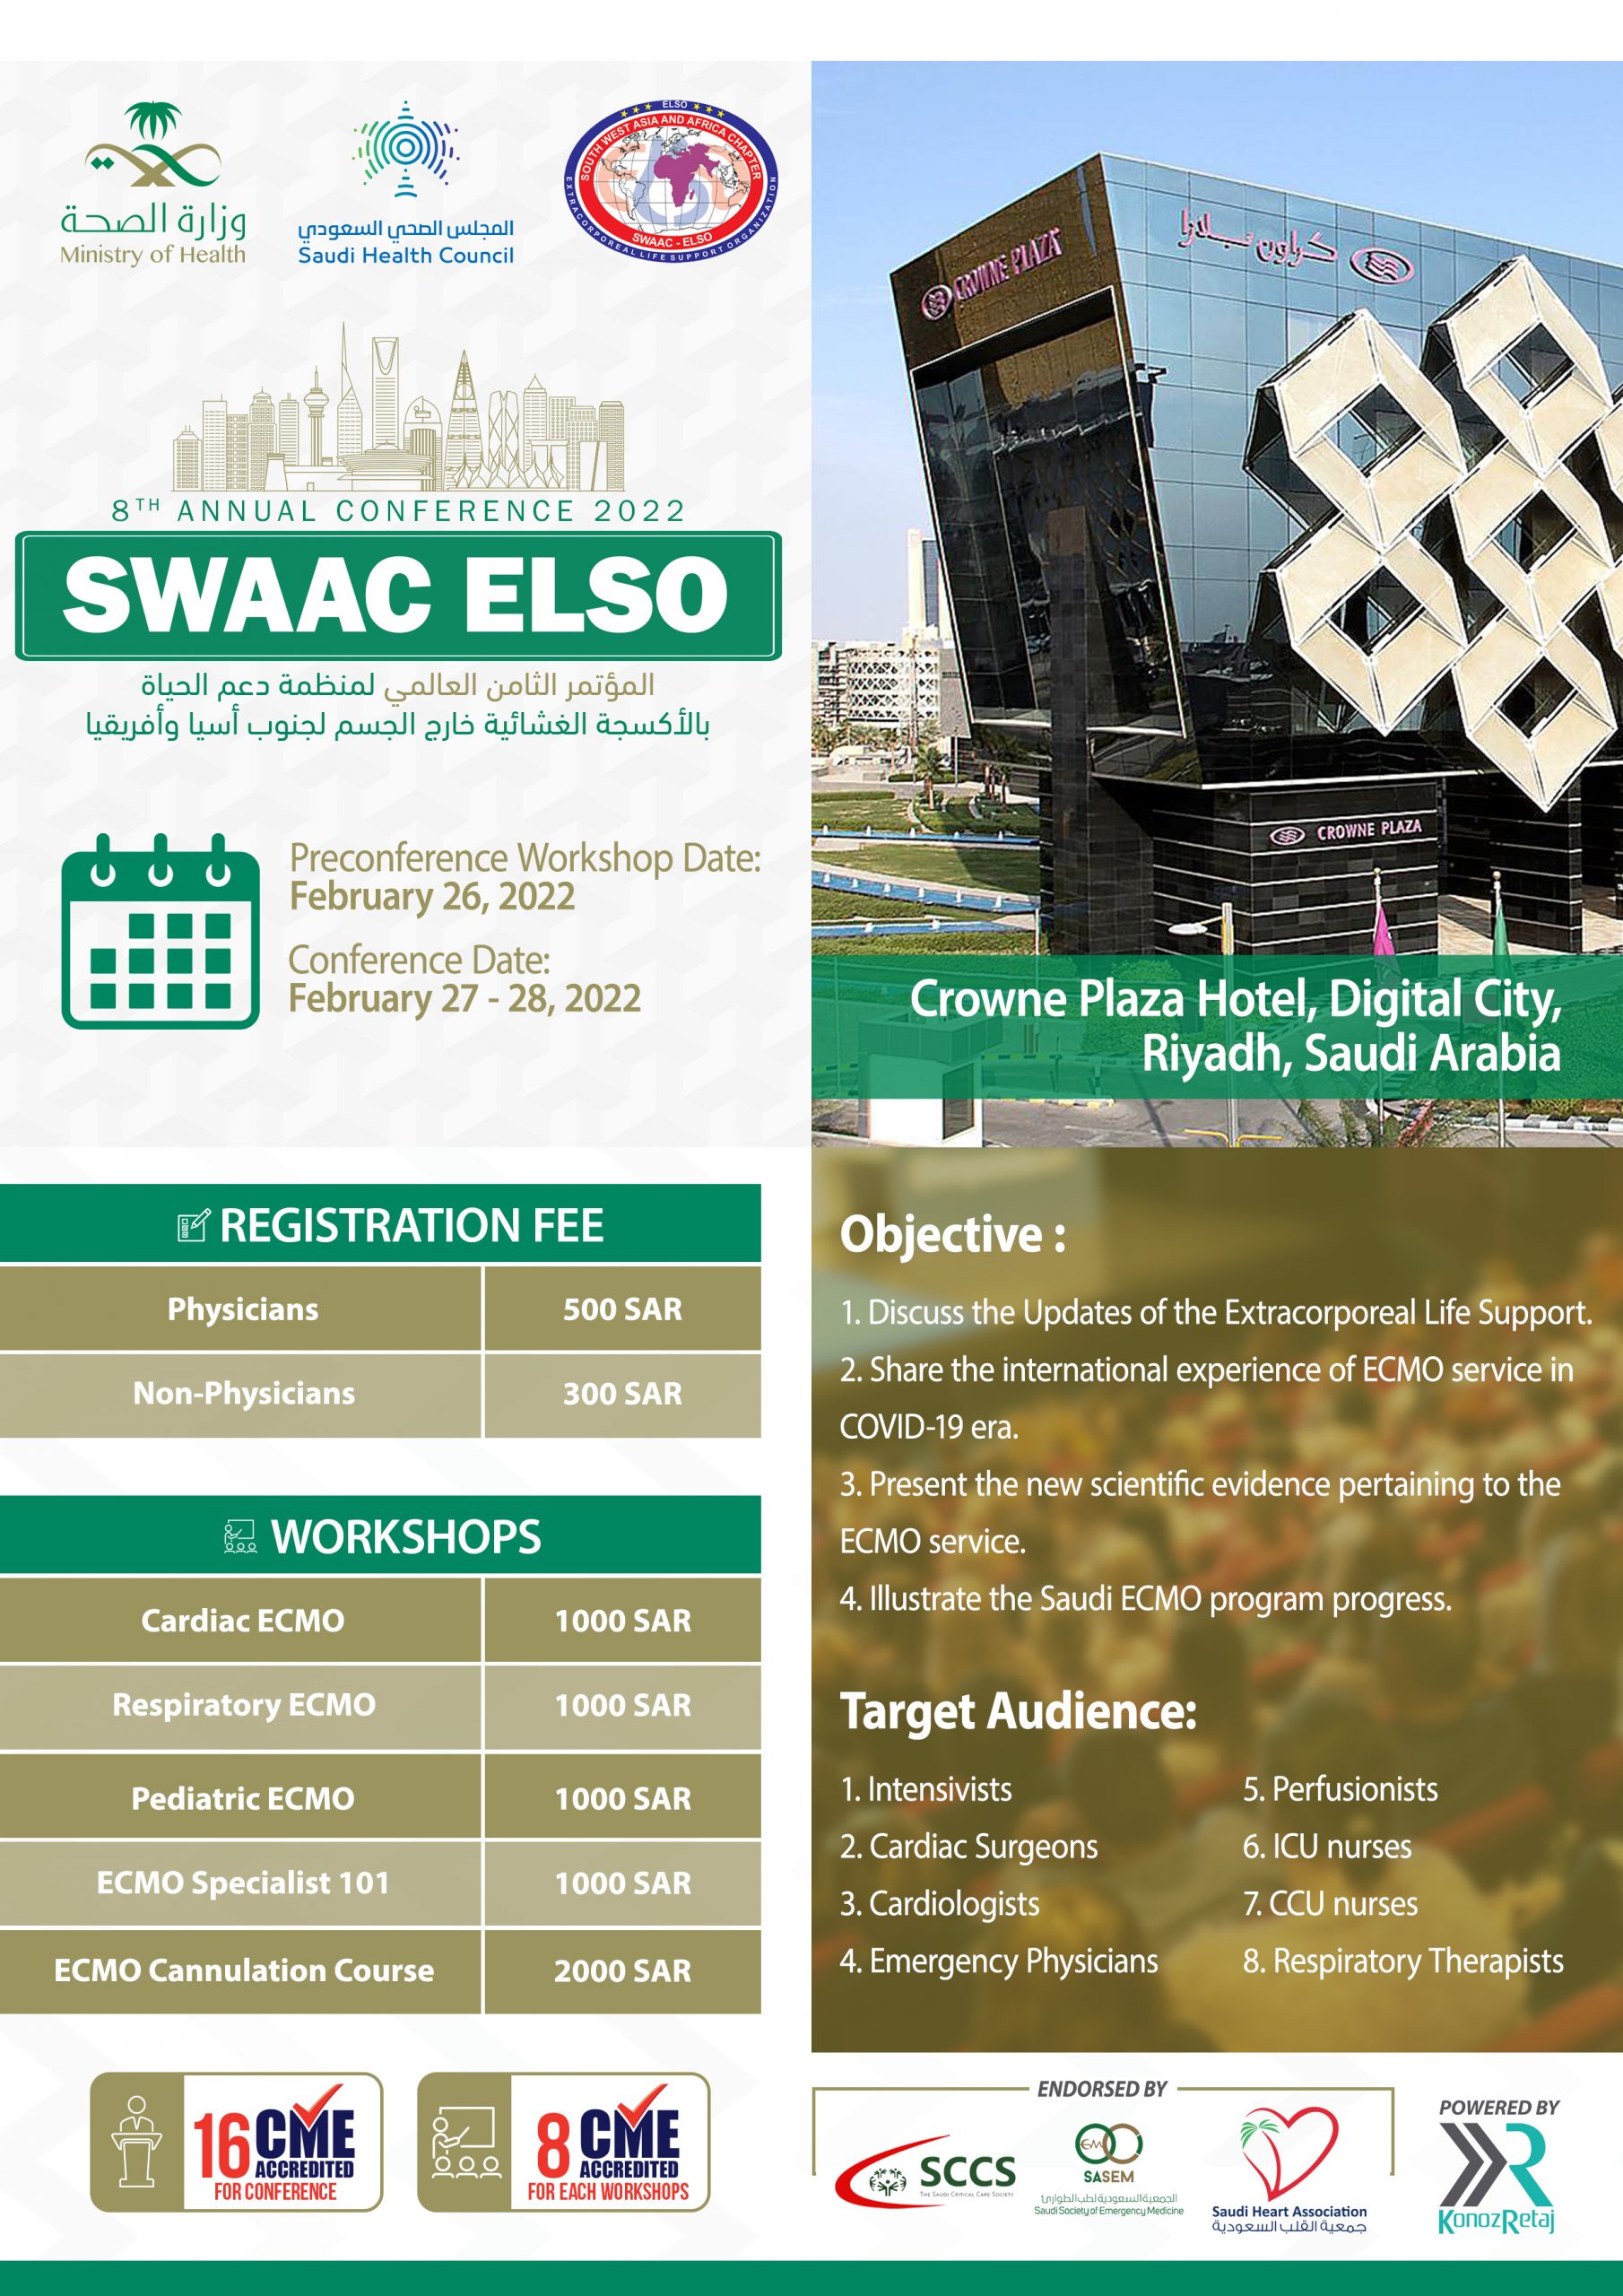 SWAAC ELSO